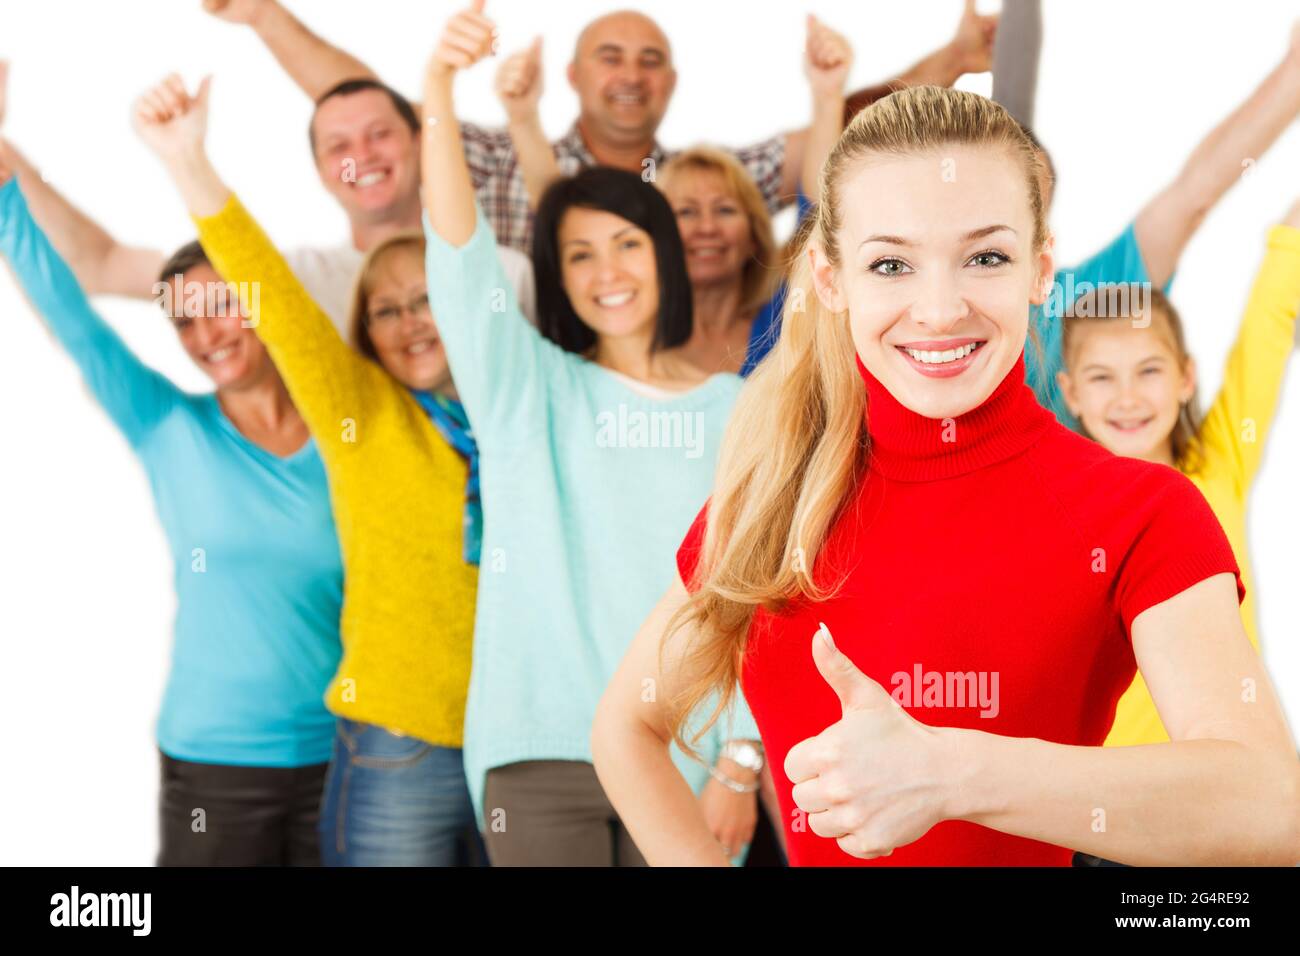 Large Group of Happy People smiling with thumbs up. Stock Photo